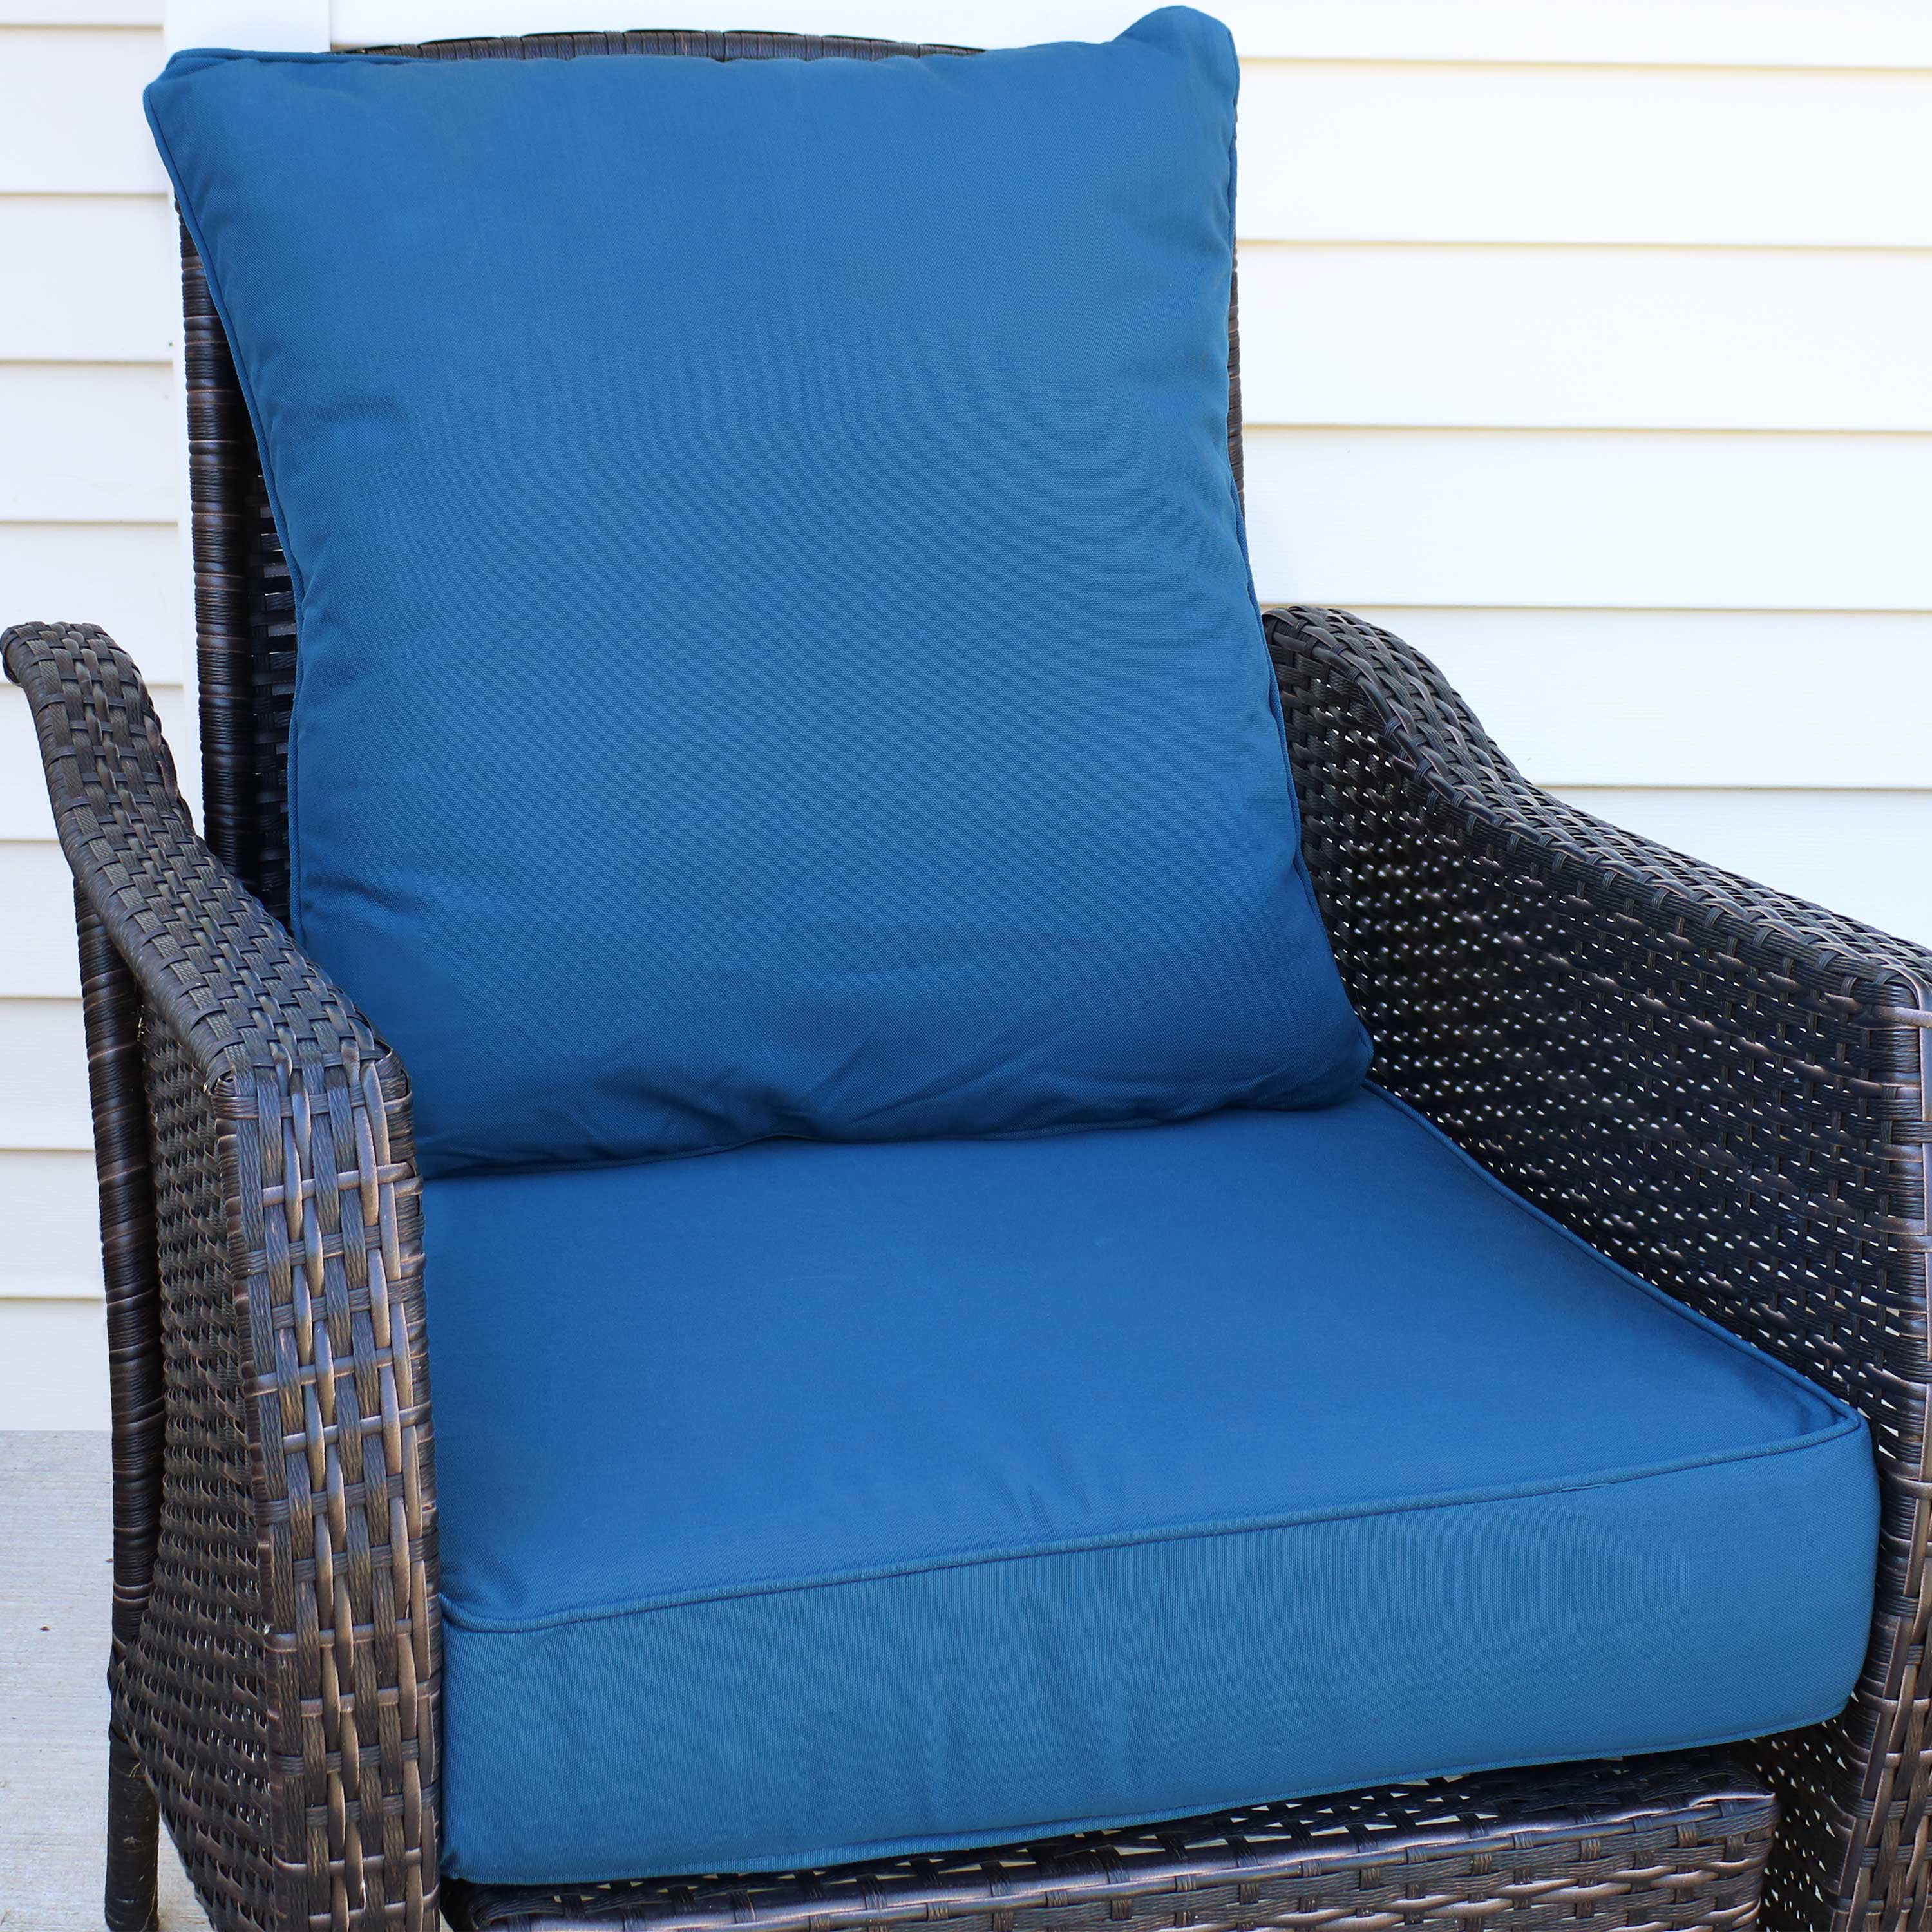 Sunnydaze Back And Seat Cushion Set For, Outdoor Wicker Chair Seat Back Cushions